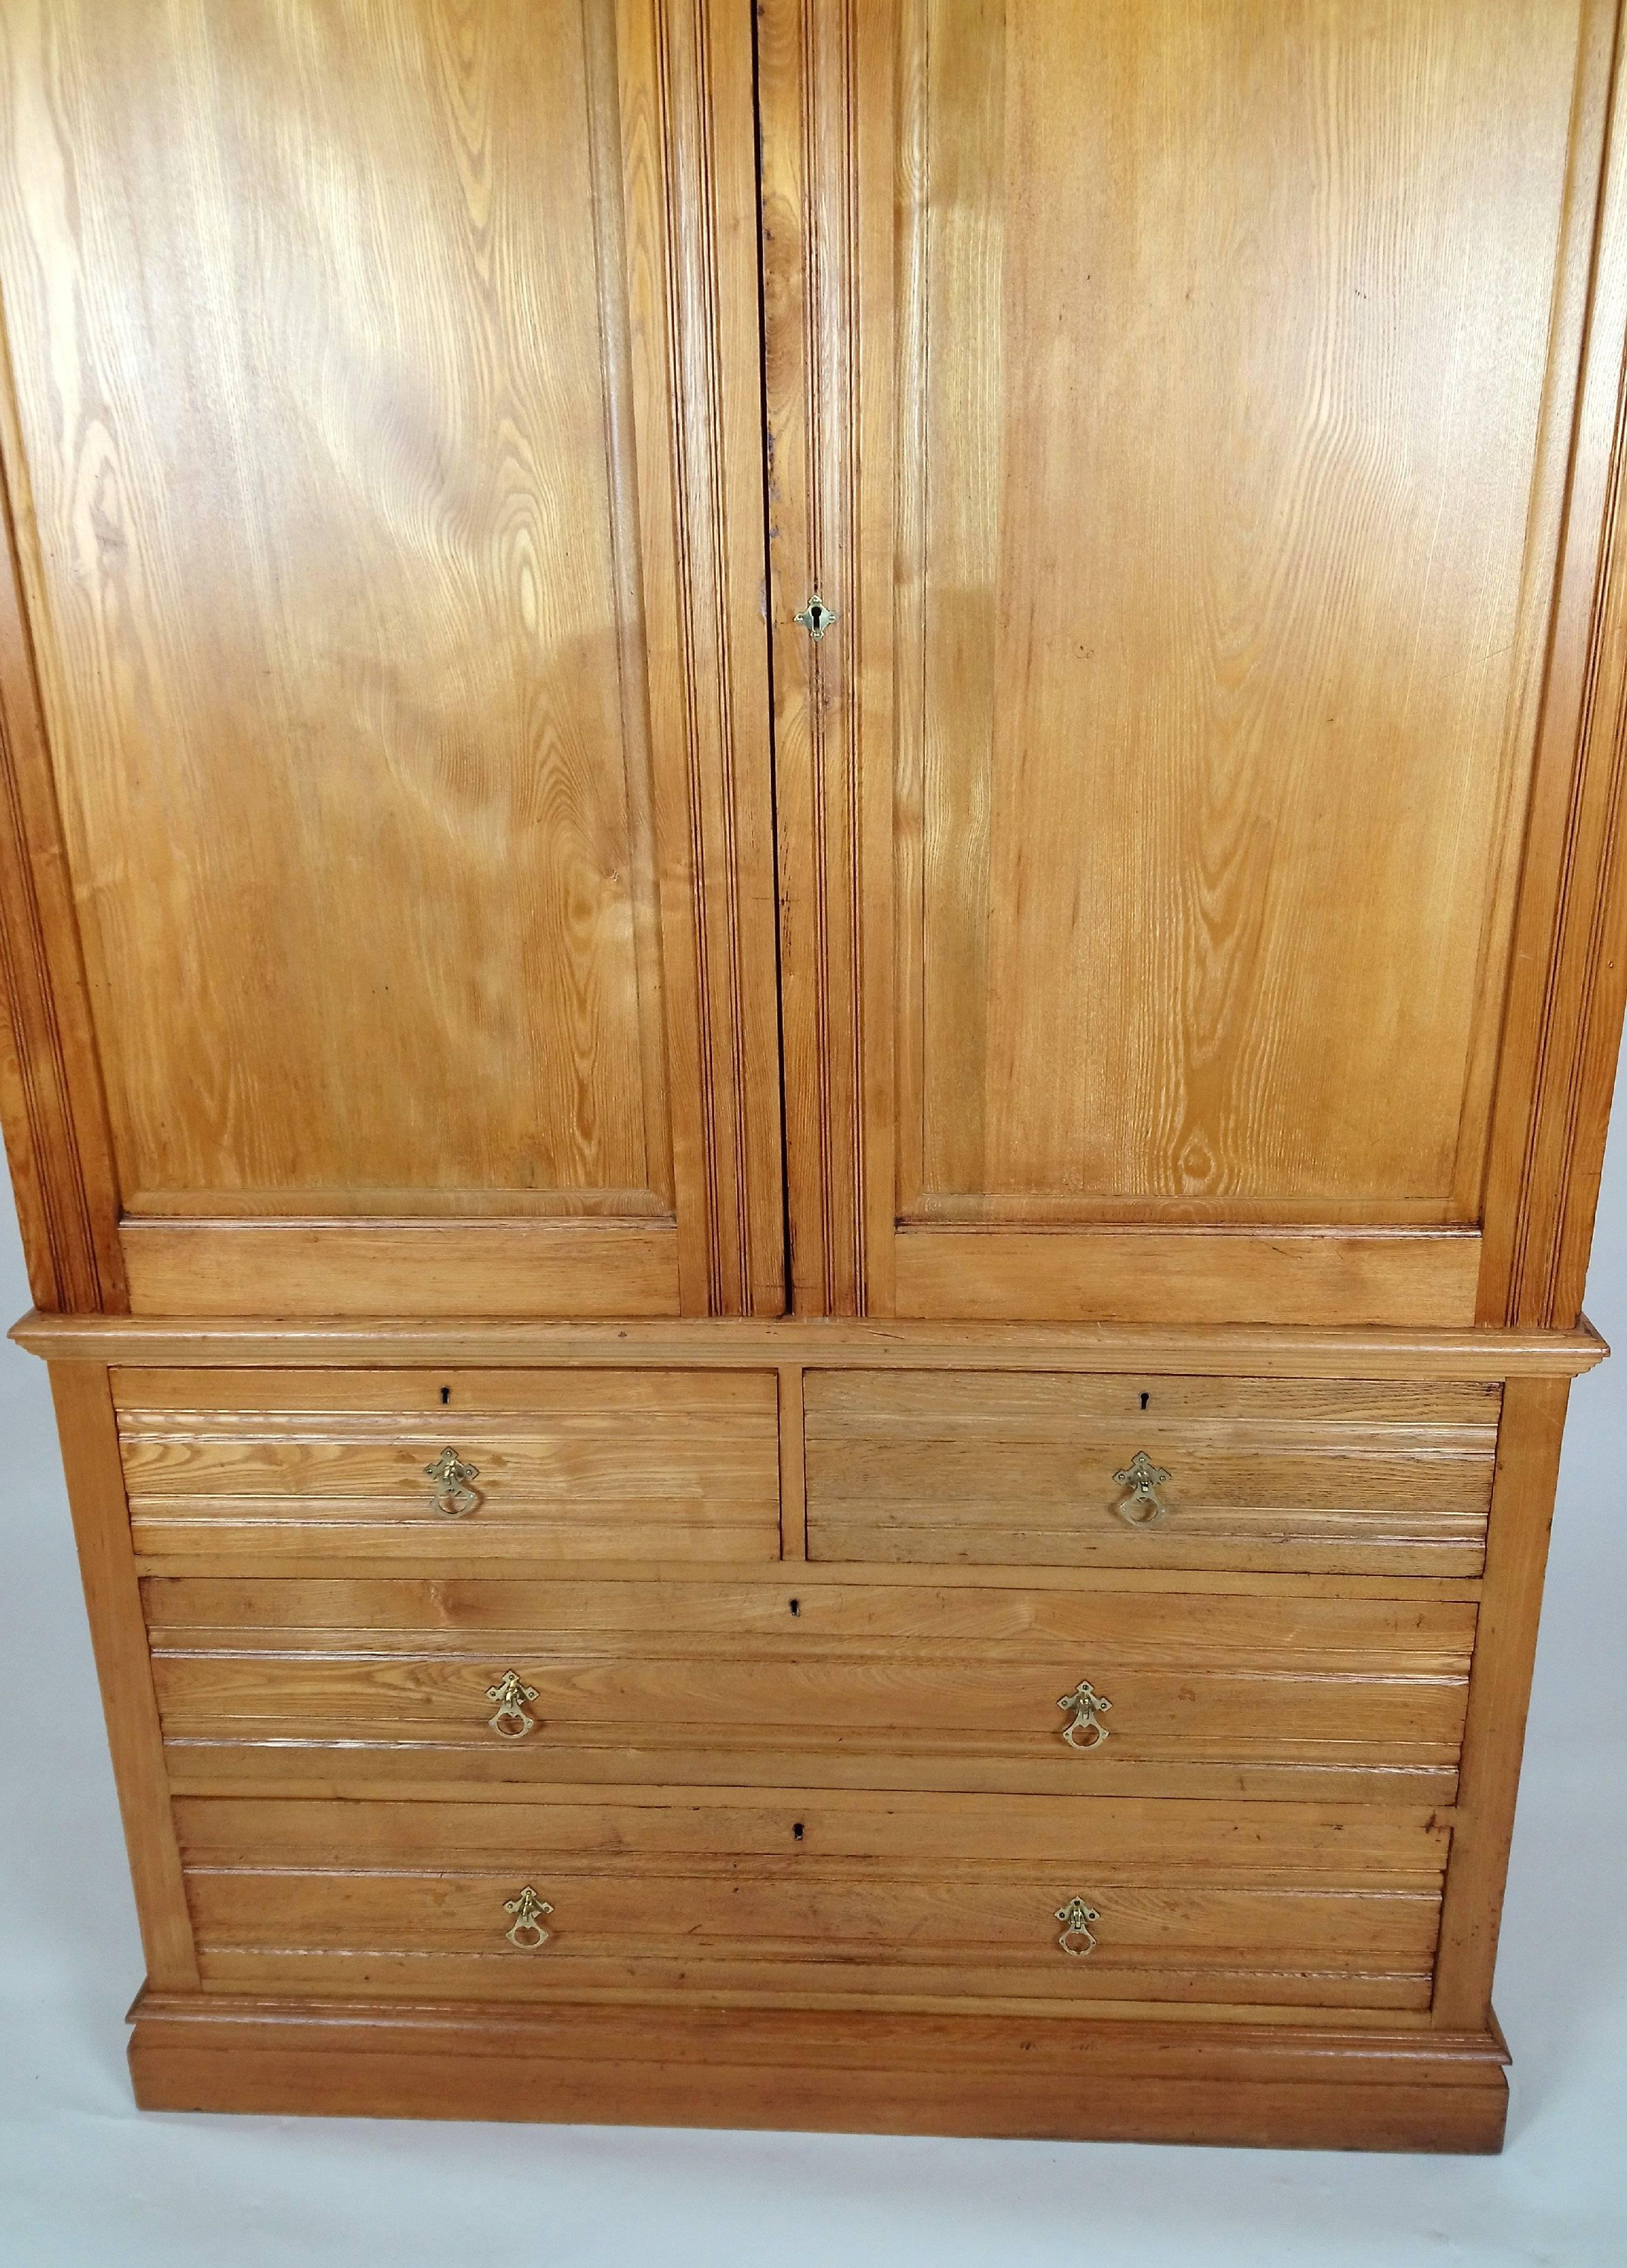 This outstanding and very attractive English Arts & Crafts ash linen press is fitted with three linen slides over two short and two long drawers. The press measures 52 ¼ in – 132.7 cm wide, 20 in – 50.8 cm deep and 81 ½ in – 207 cm in height. This